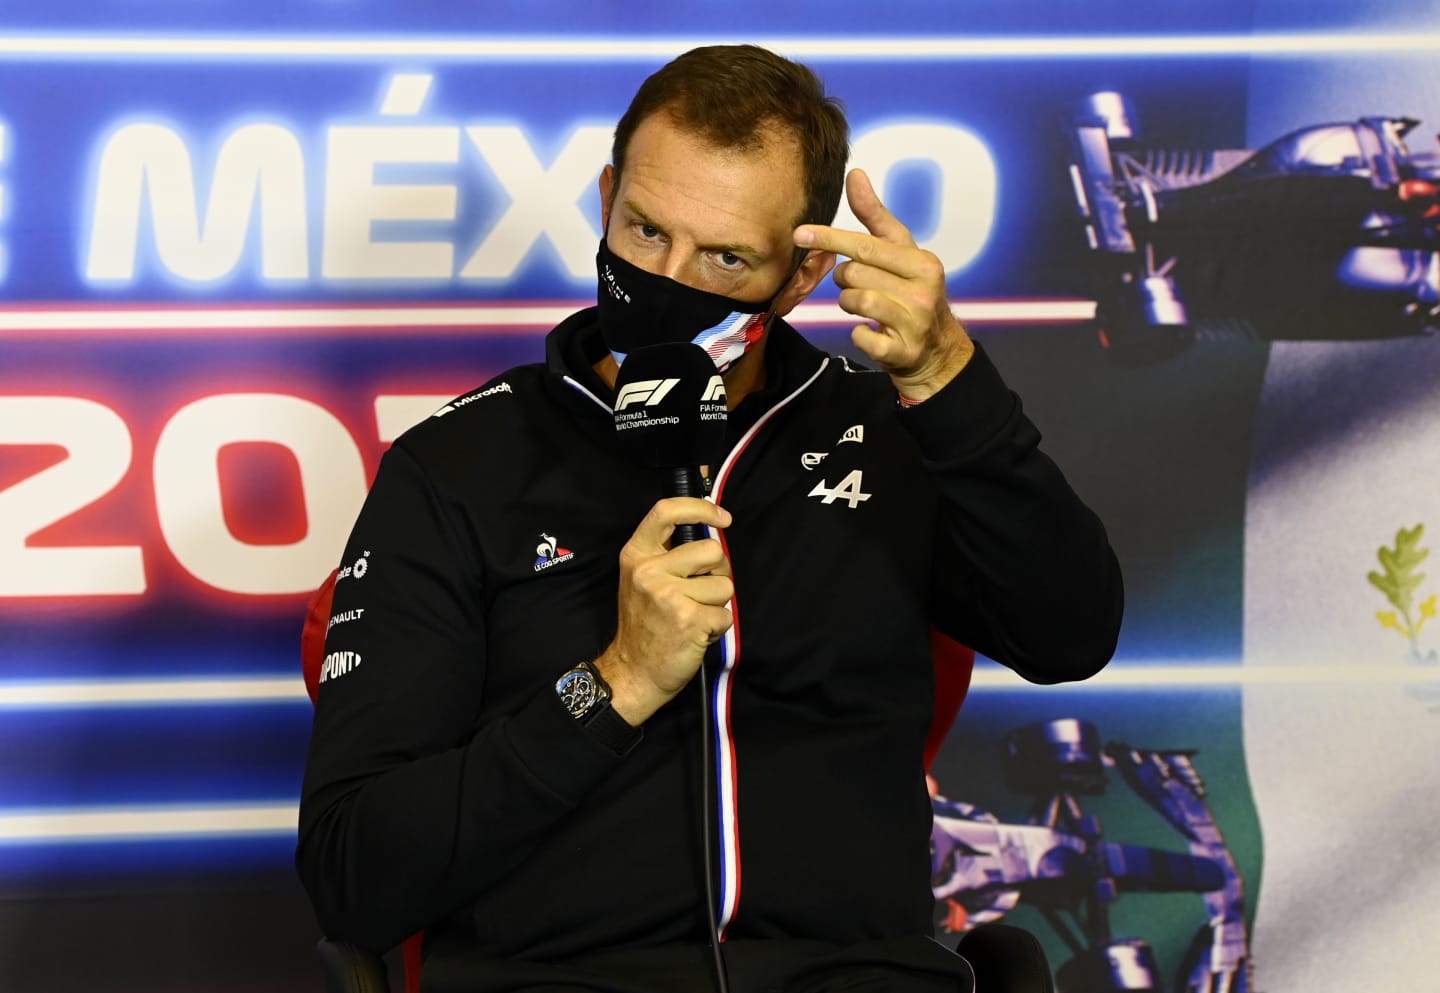 MEXICO CITY, MEXICO - NOVEMBER 05: Laurent Rossi, CEO of Alpine F1 talks in the Team Principals Press Conference during practice ahead of the F1 Grand Prix of Mexico at Autodromo Hermanos Rodriguez on November 05, 2021 in Mexico City, Mexico. (Photo by Mark Sutton - Pool/Getty Images)